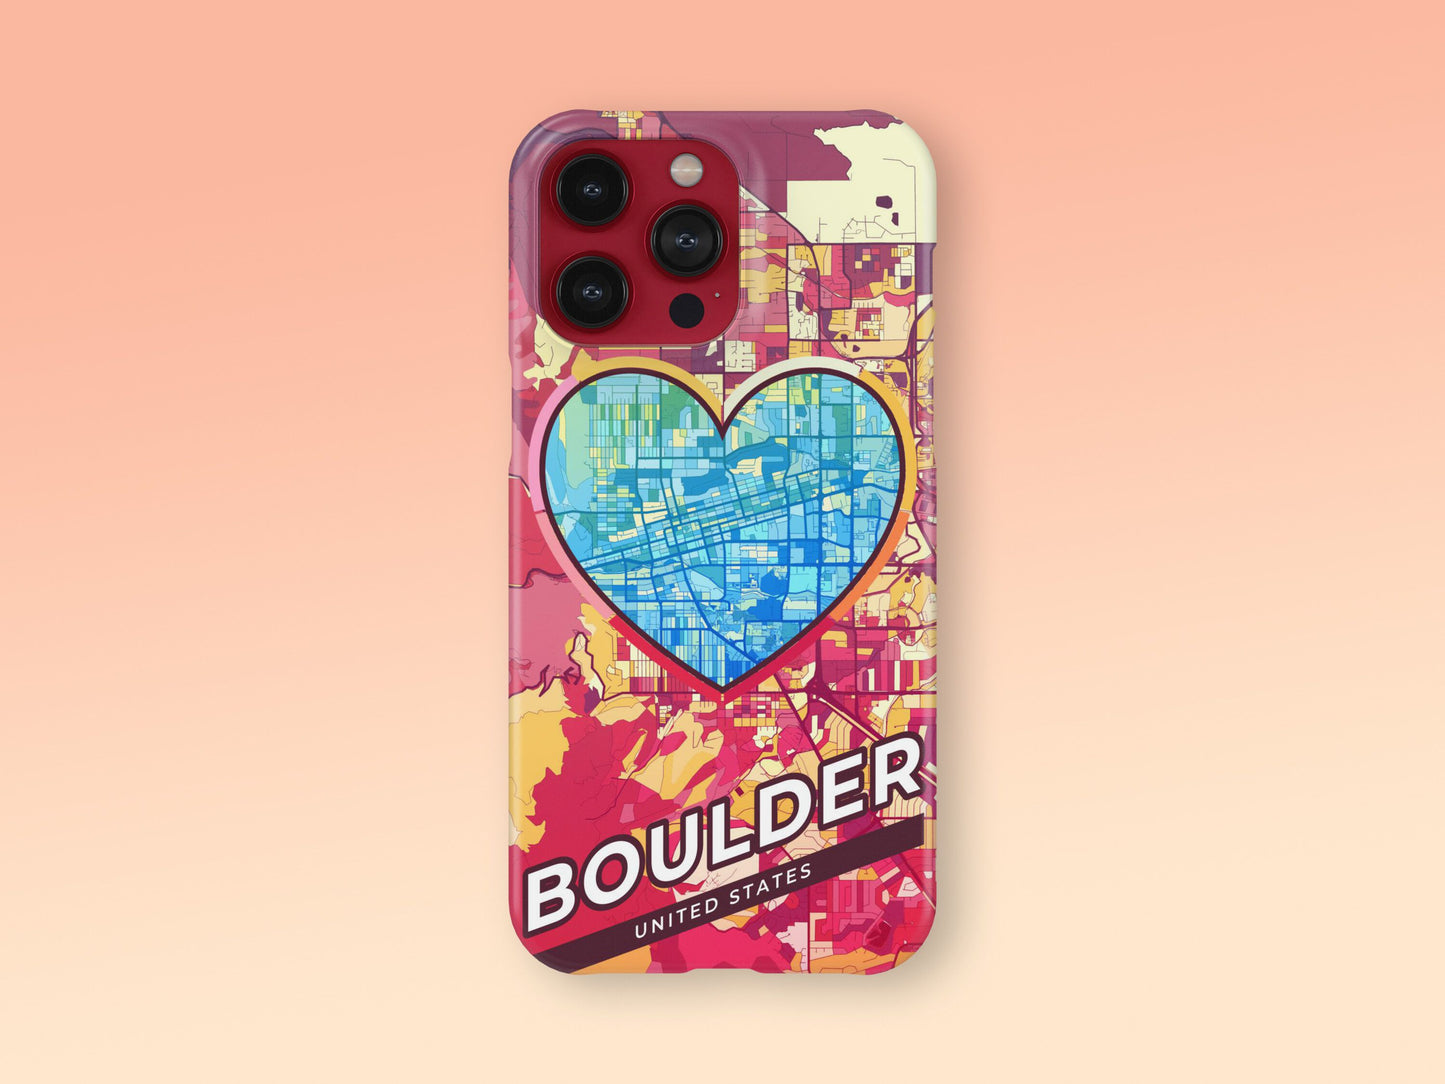 Boulder Colorado slim phone case with colorful icon. Birthday, wedding or housewarming gift. Couple match cases. 2